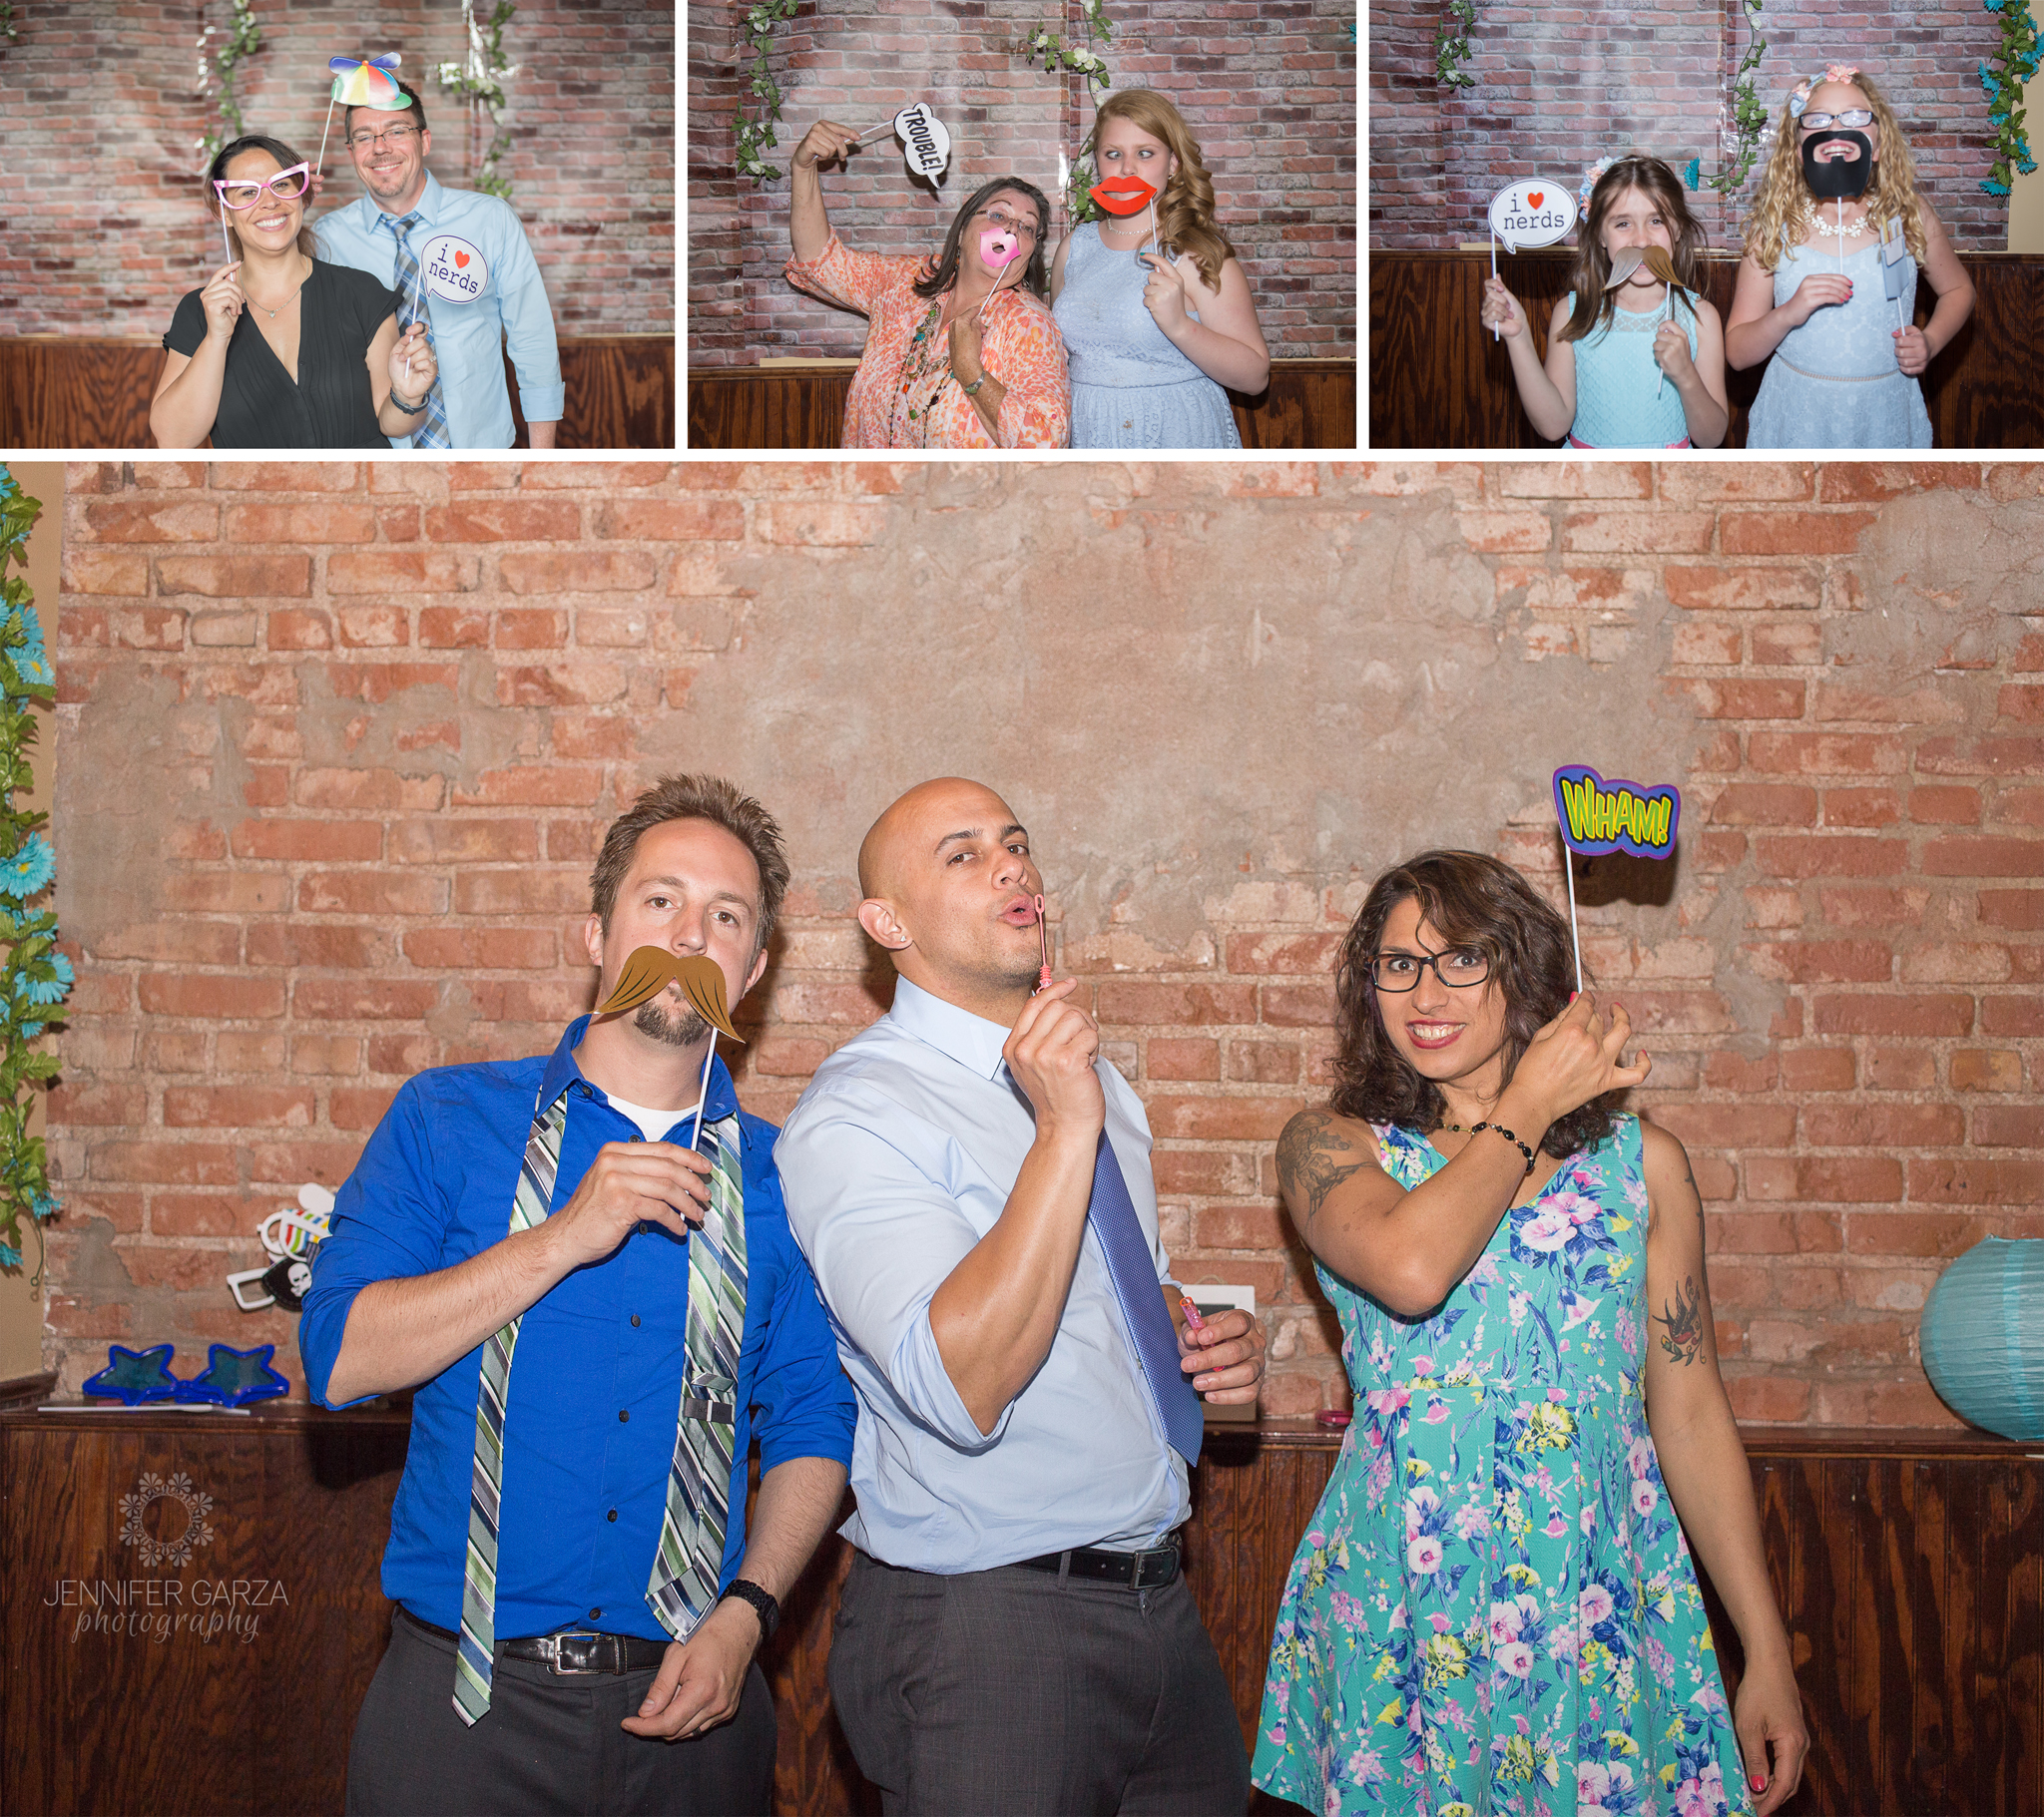 Groom & Guests in the photobooth during a summer wedding at a pub. Rachael & Wes' Wash Park and Irish Rover Pub Denver Wedding by Colorado Wedding Photographer, Jennifer Garza. Colorado Wedding Photographer, Denver Wedding Photographer, Colorado Wedding Photos, Denver Wedding Photos, Colorado Bride, Denver Bride, Wash Park Wedding, Wash Park, Irish Rover Pub, Irish Rover Pub Wedding, Pub Wedding, Park Wedding